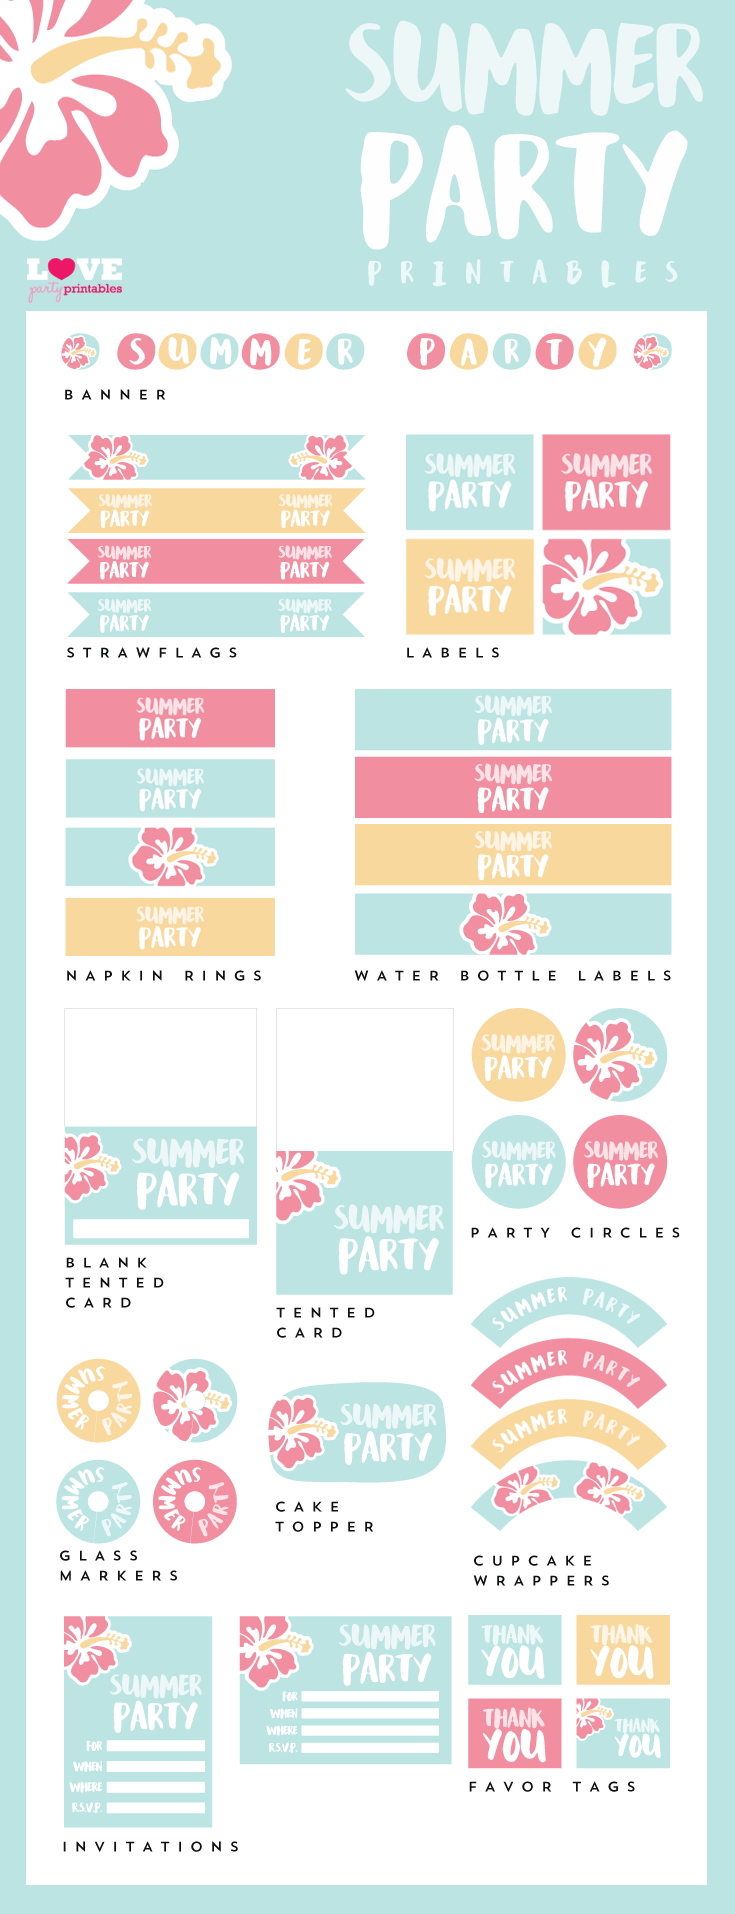 catchmyparty-free-printables-templates-printable-download